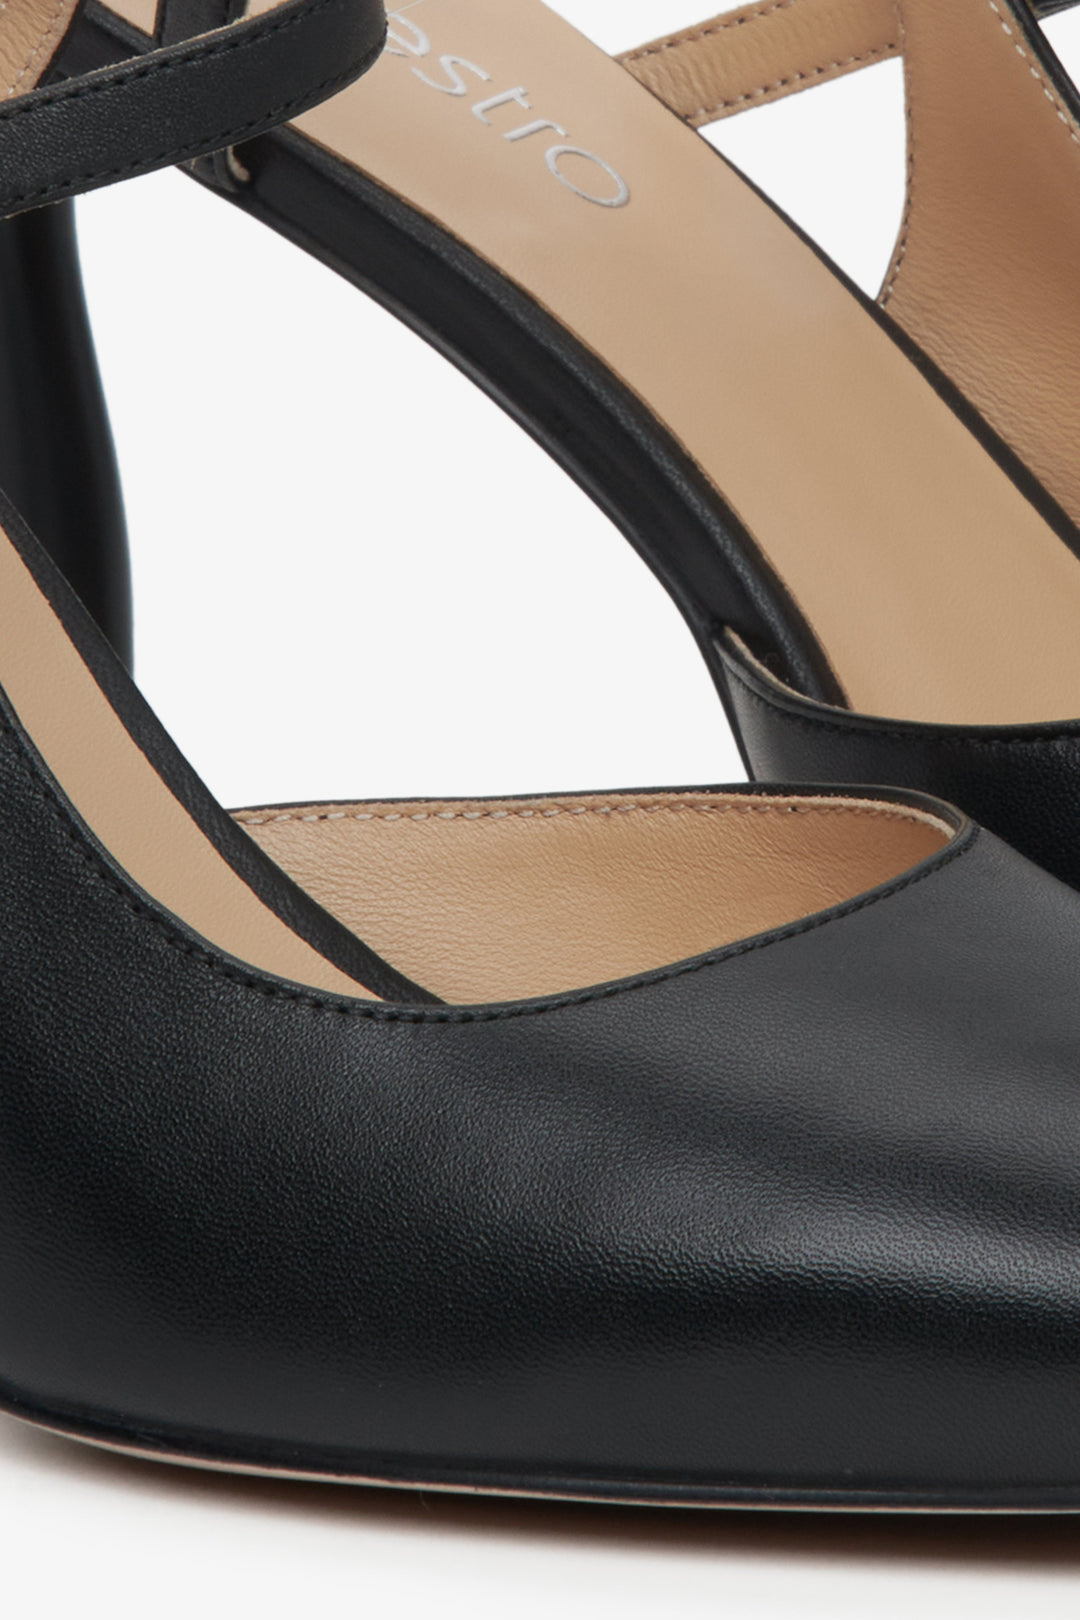 Women's black slingback heels with a pointed toe - a close up on detaiks.